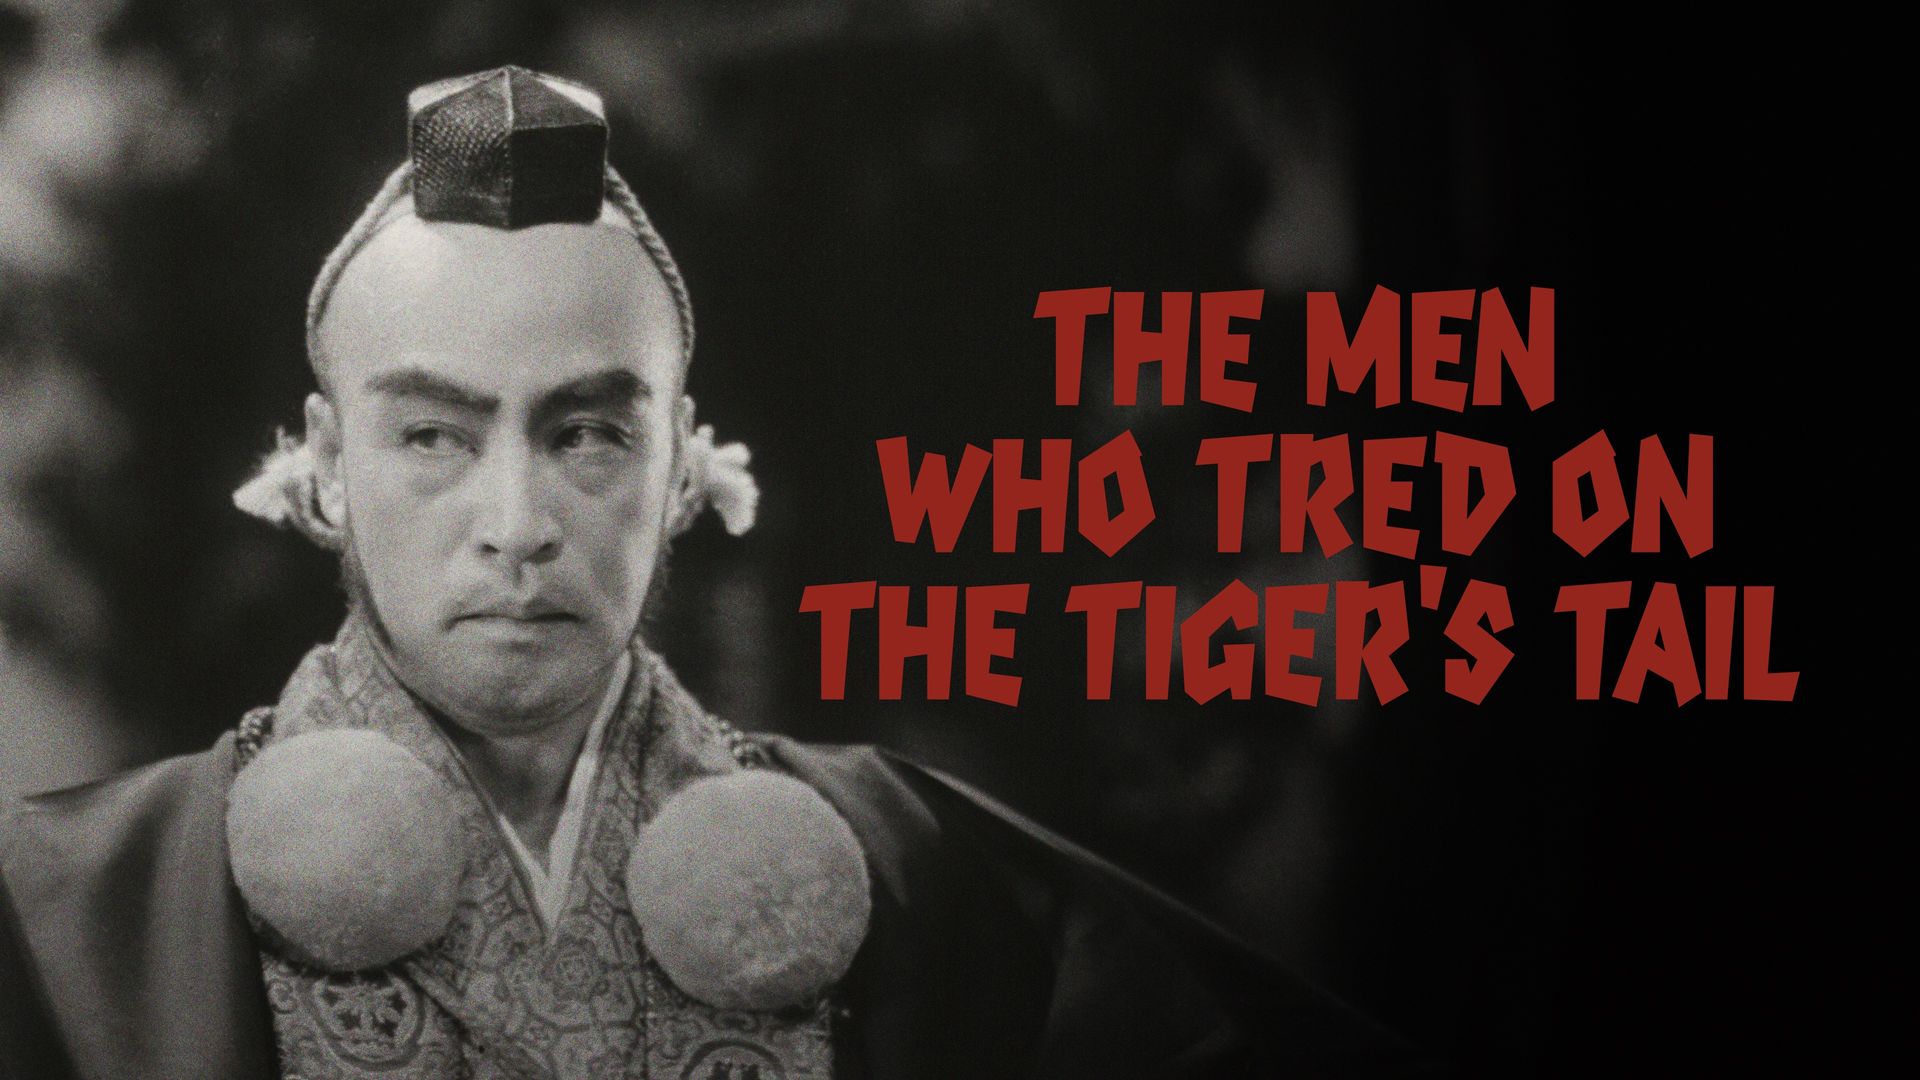 The Men Who Tread on the Tiger's Tail Backdrop